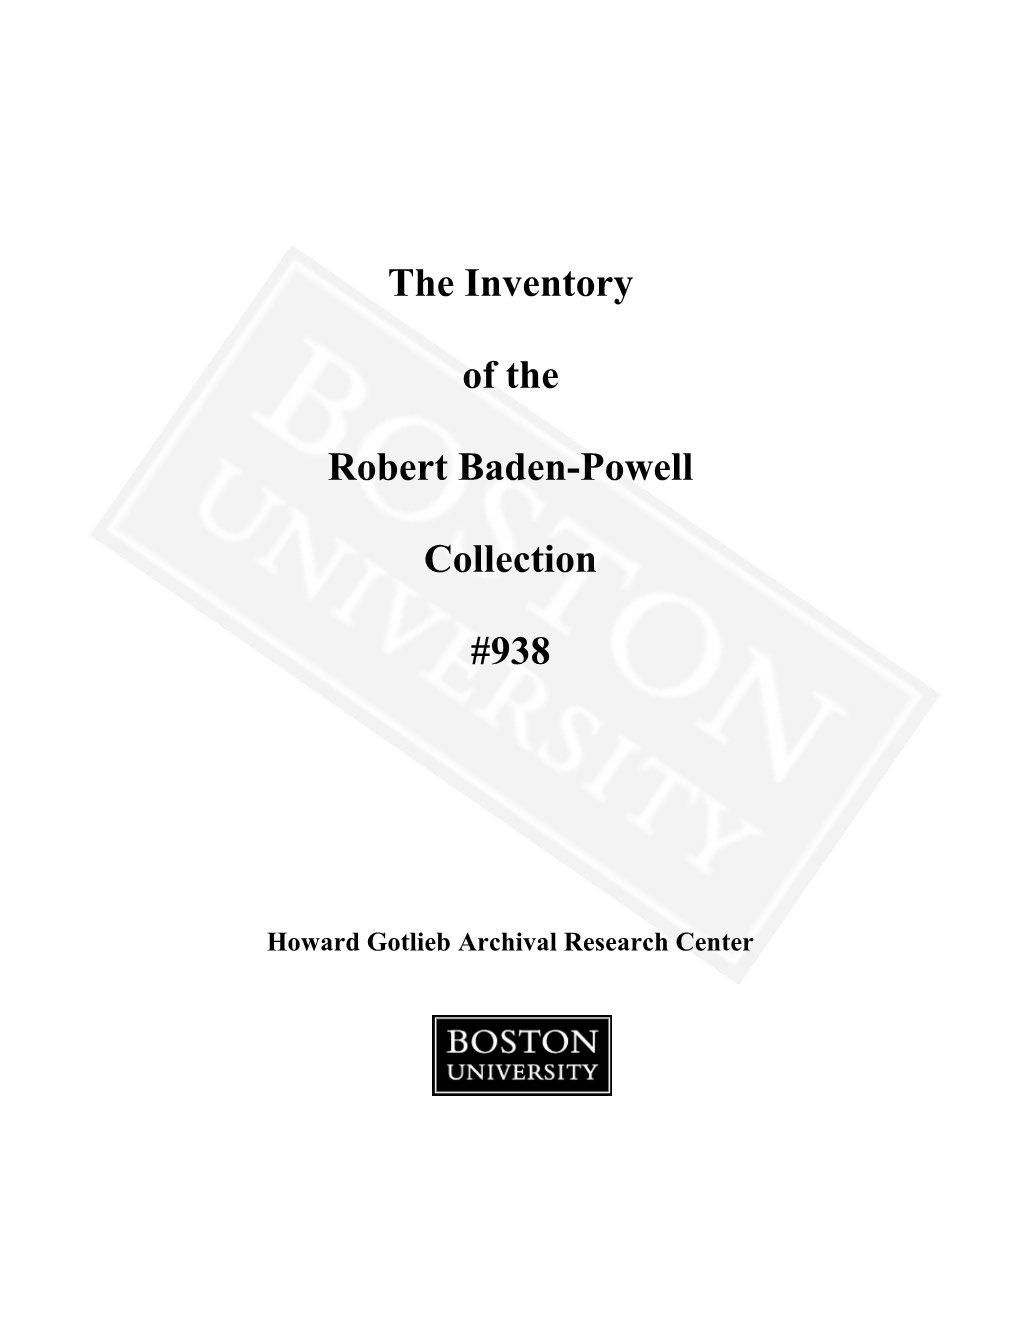 The Inventory of the Robert Baden-Powell Collection #938